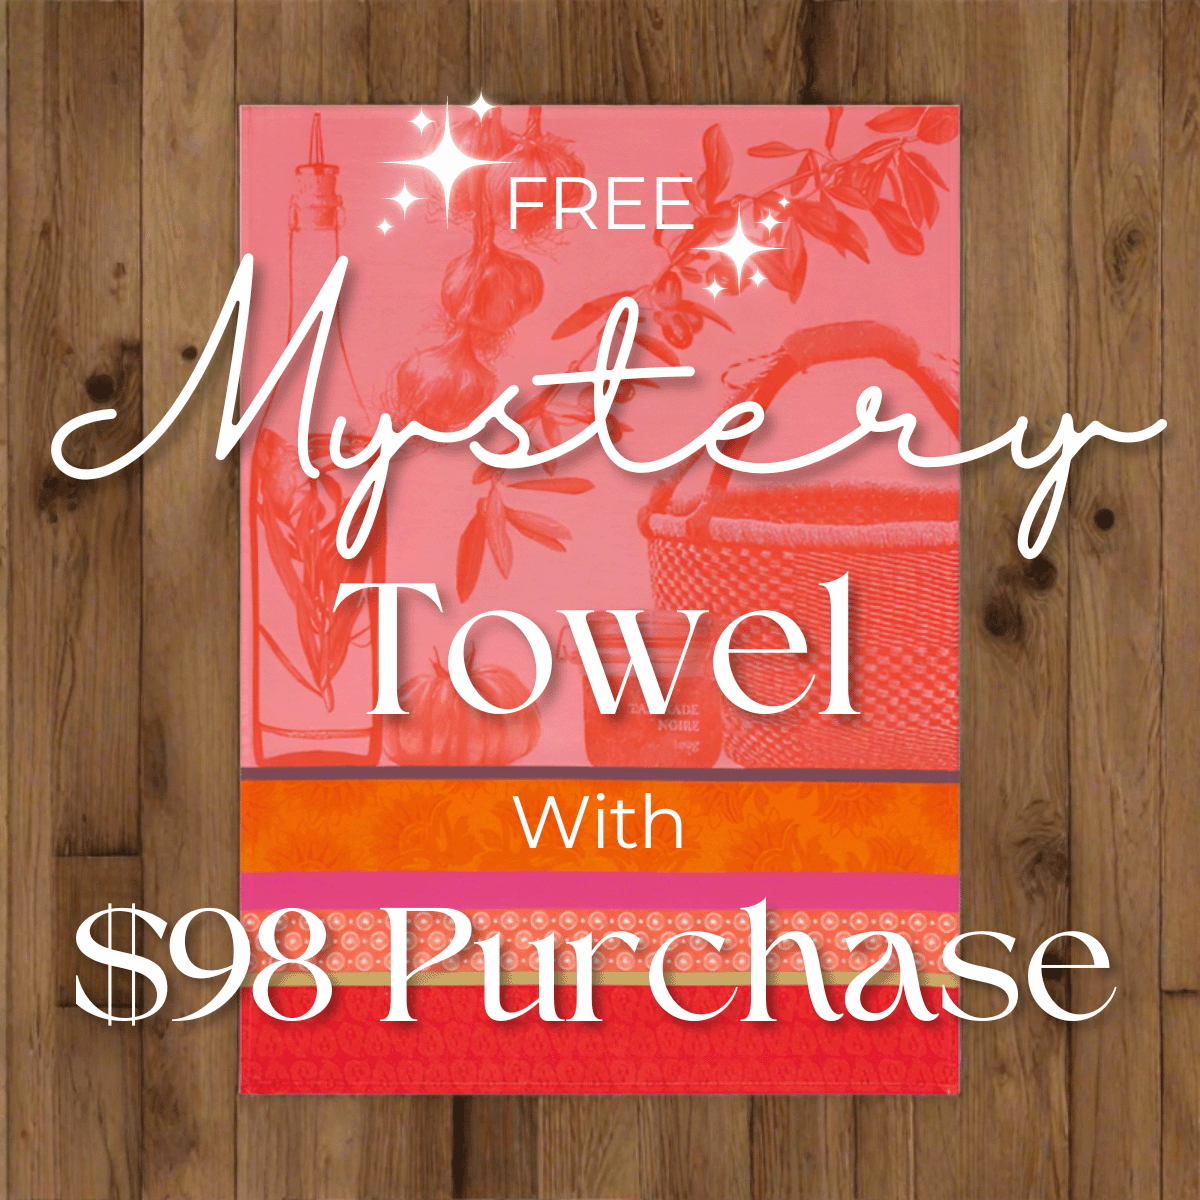 Free! Surprise Mystery Towel